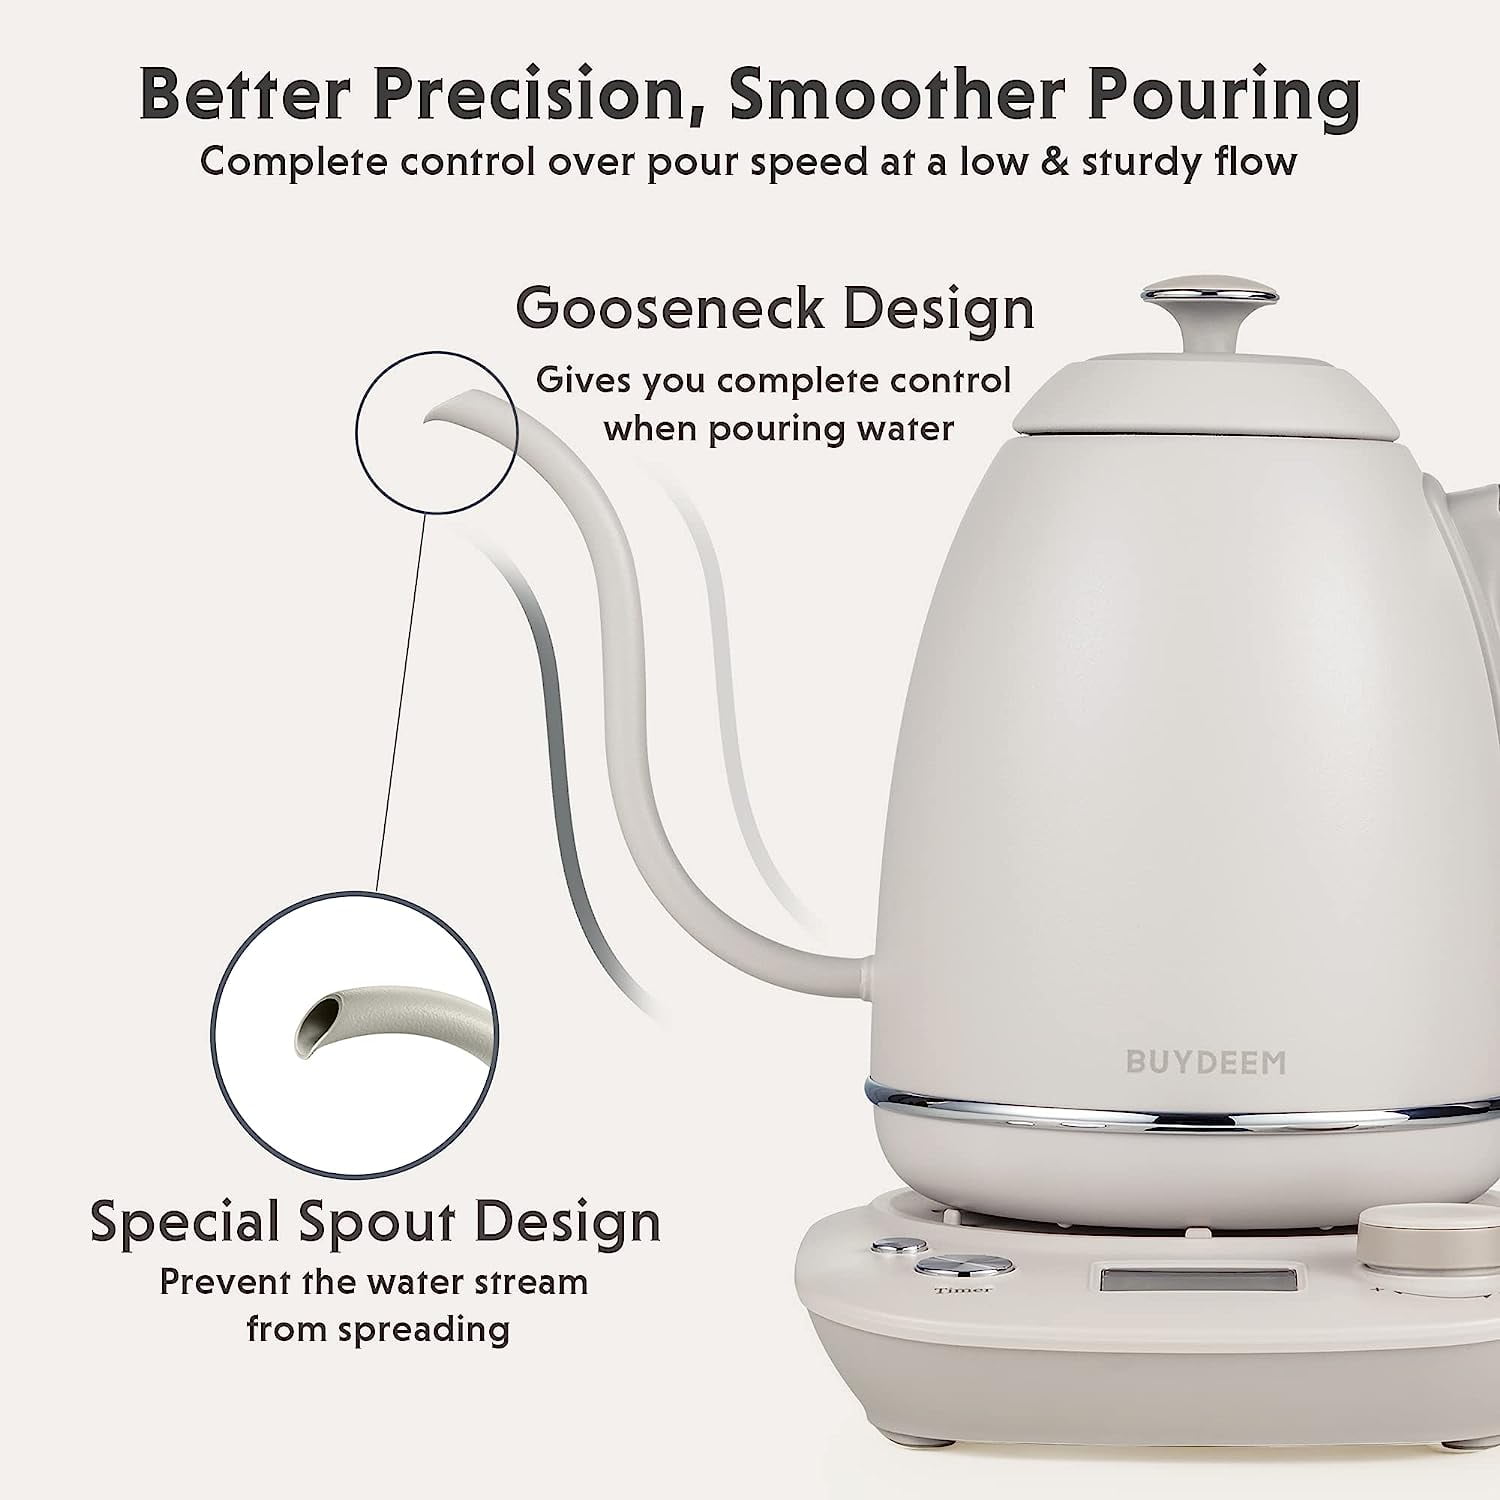  TUMIDY Electric Gooseneck Kettle Temperature Control 1L 8  Variable Presets Pour over Coffee Kettle, 1500W Rapid Heating, Stainless  Steel Inner, Auto Shutoff Anti-dry Protection Matte Black: Home & Kitchen